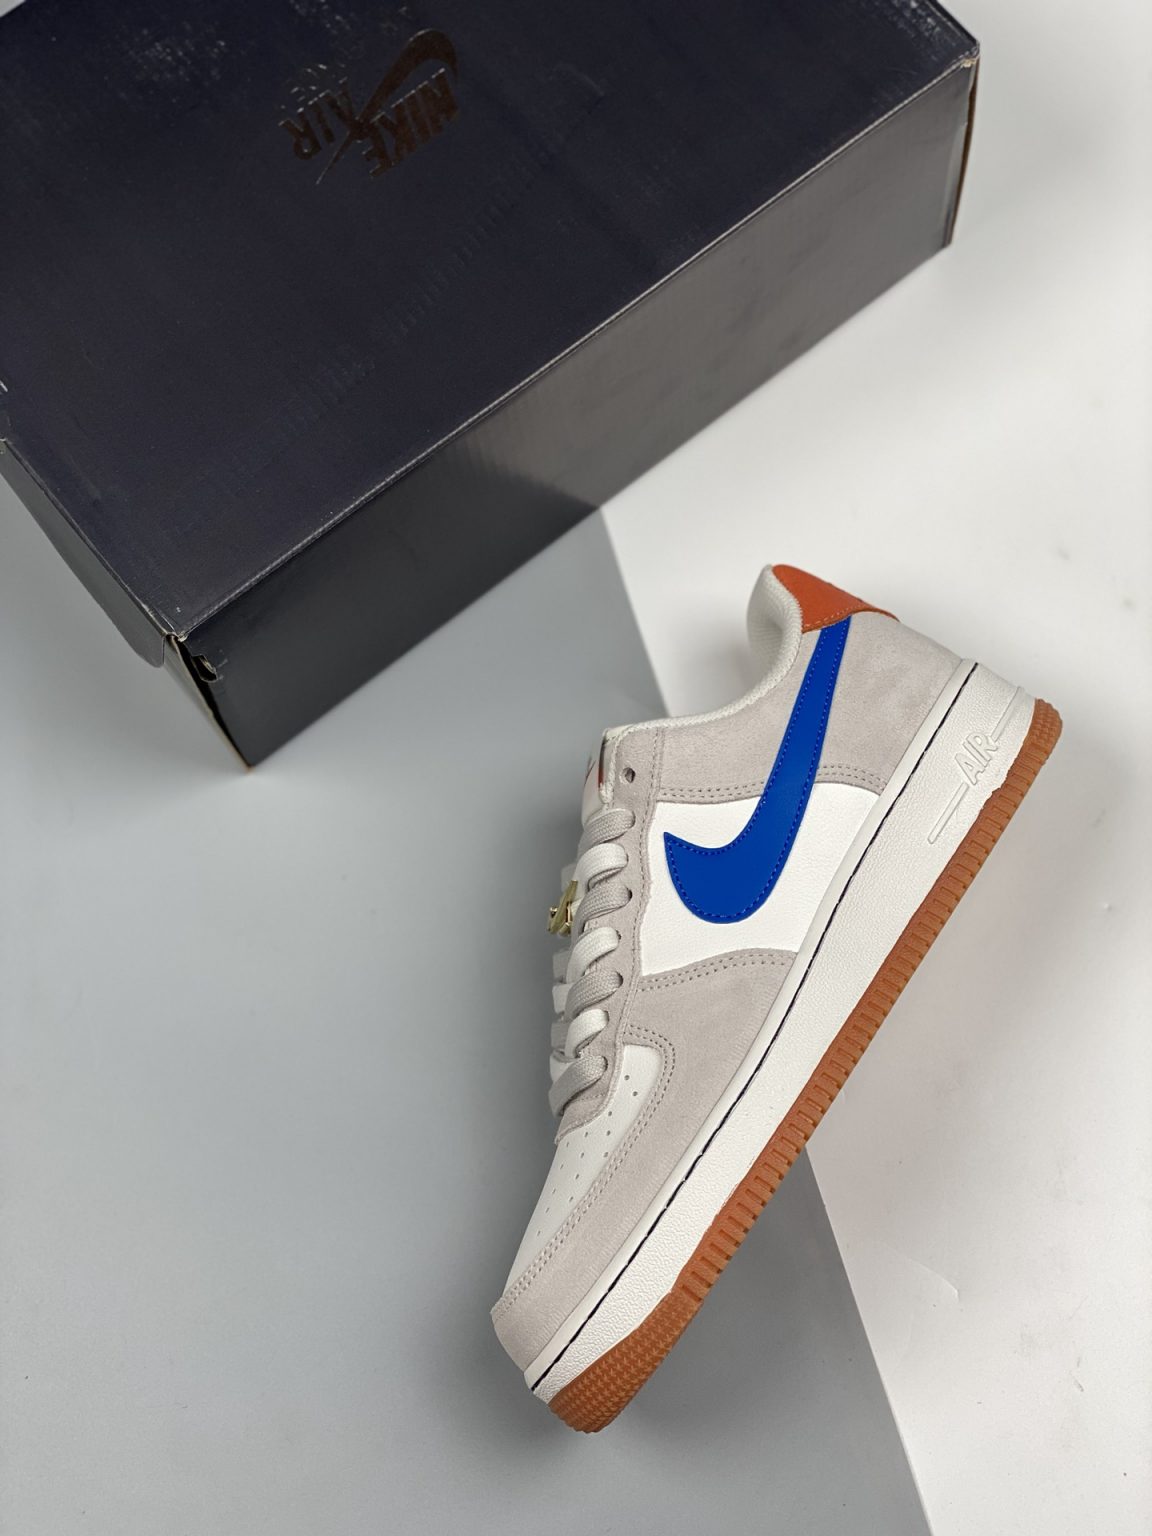 Nike Air Force 1 Low “First Use” DA8302-100 For Sale – Sneaker Hello